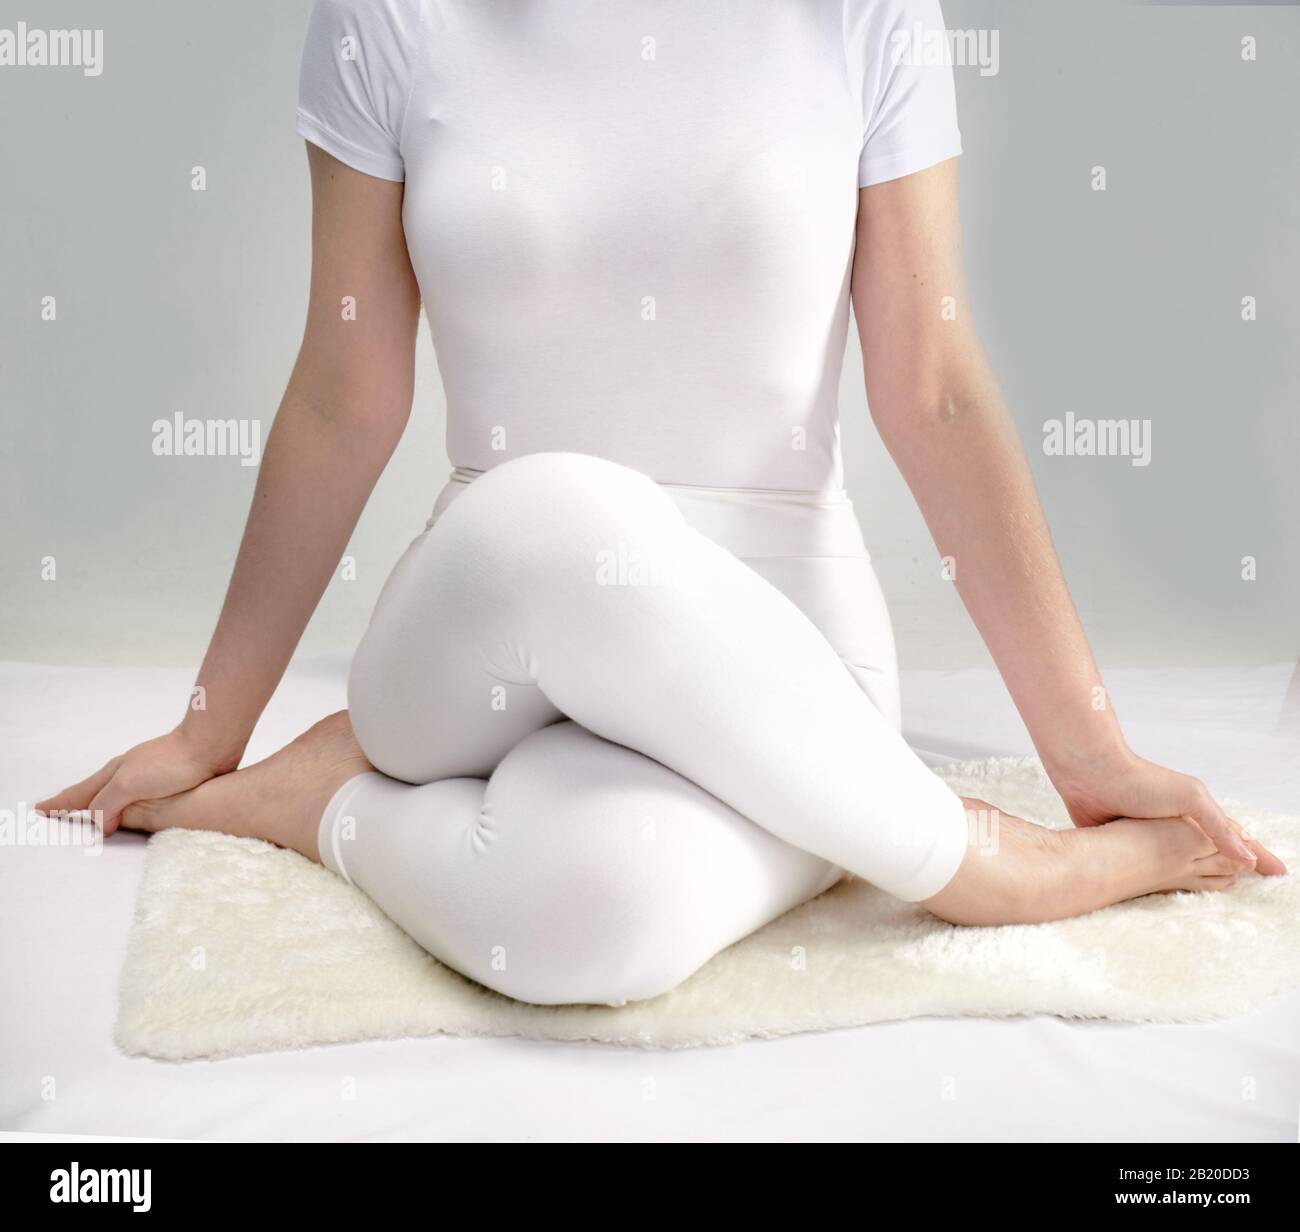 woman in white dress practicing yoga poses Stock Photo